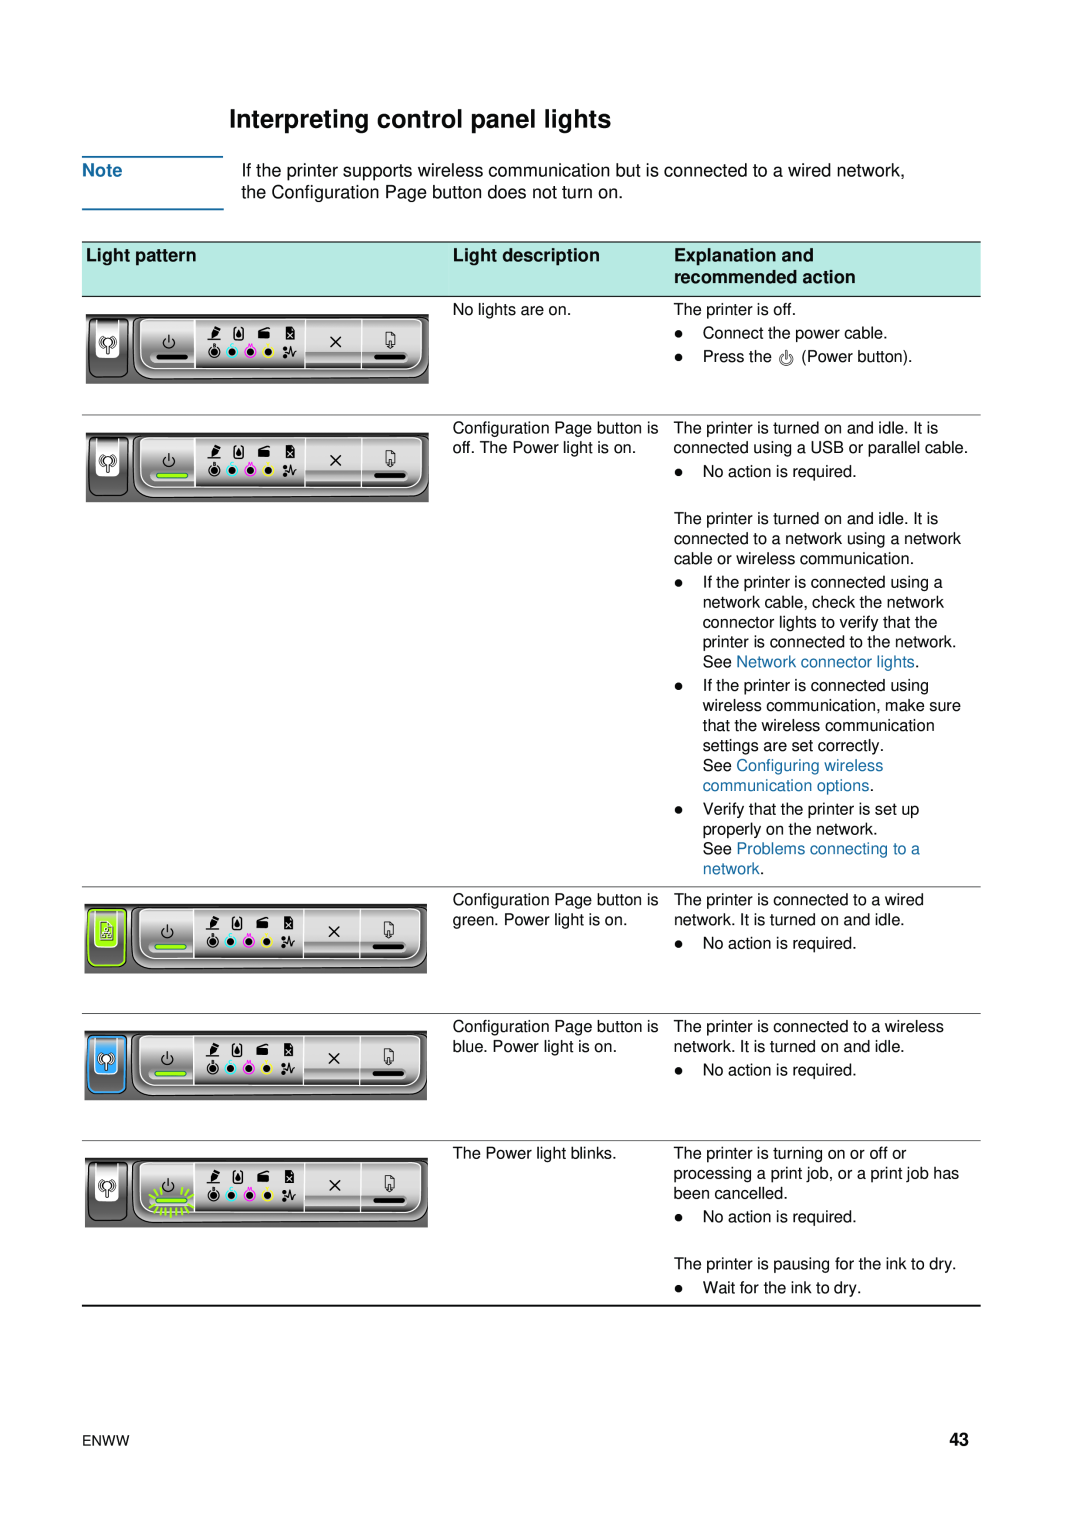 HP 1200 Interpreting control panel lights, Light pattern, Light description, Explanation and, recommended action, network 